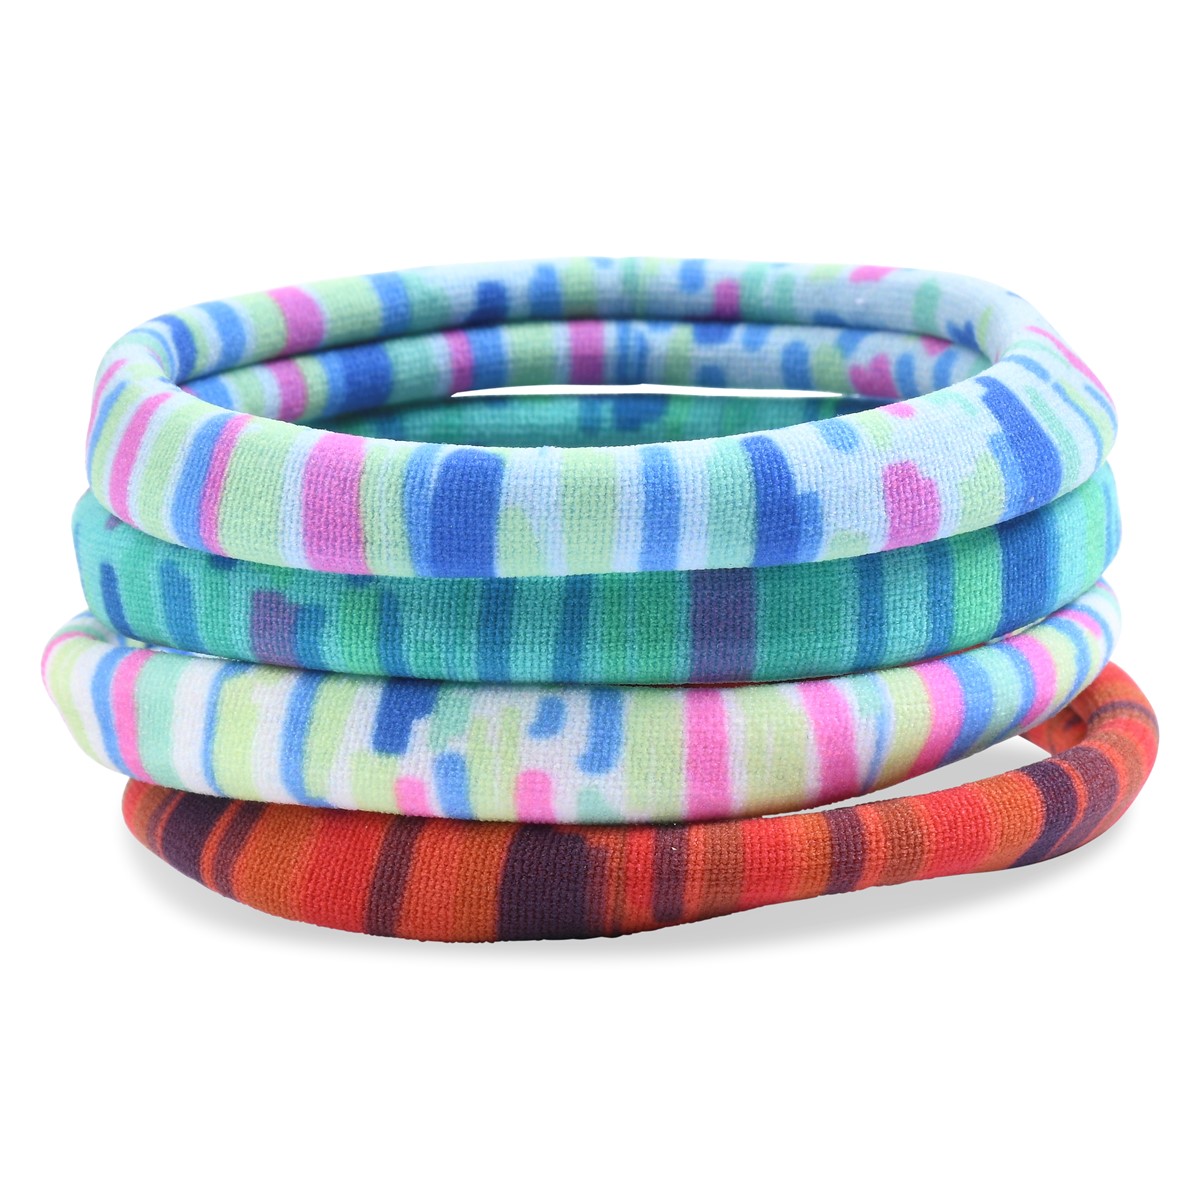 Bamboo Trading Company Boho Hair Ties Set of 8 Forest Tie Dye Print 